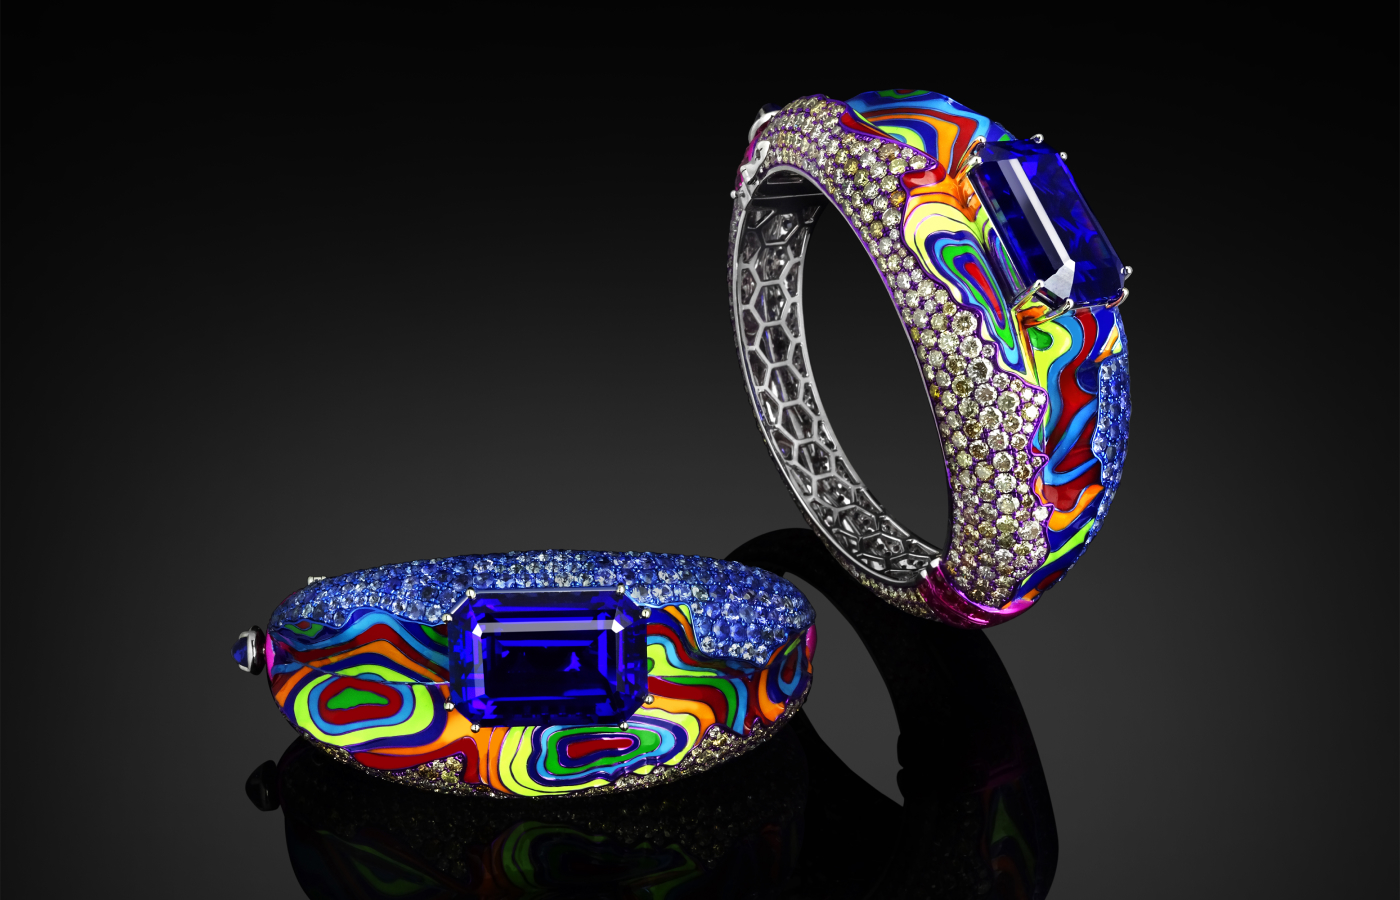 Austy Lee ‘The Hypnotic Magma Bangle’ in 18K white gold with tanzanite, Sri Lankan blue sapphire, red, orange yellow, blue, green and turquoise enamels, blue sapphires, rubies and diamonds